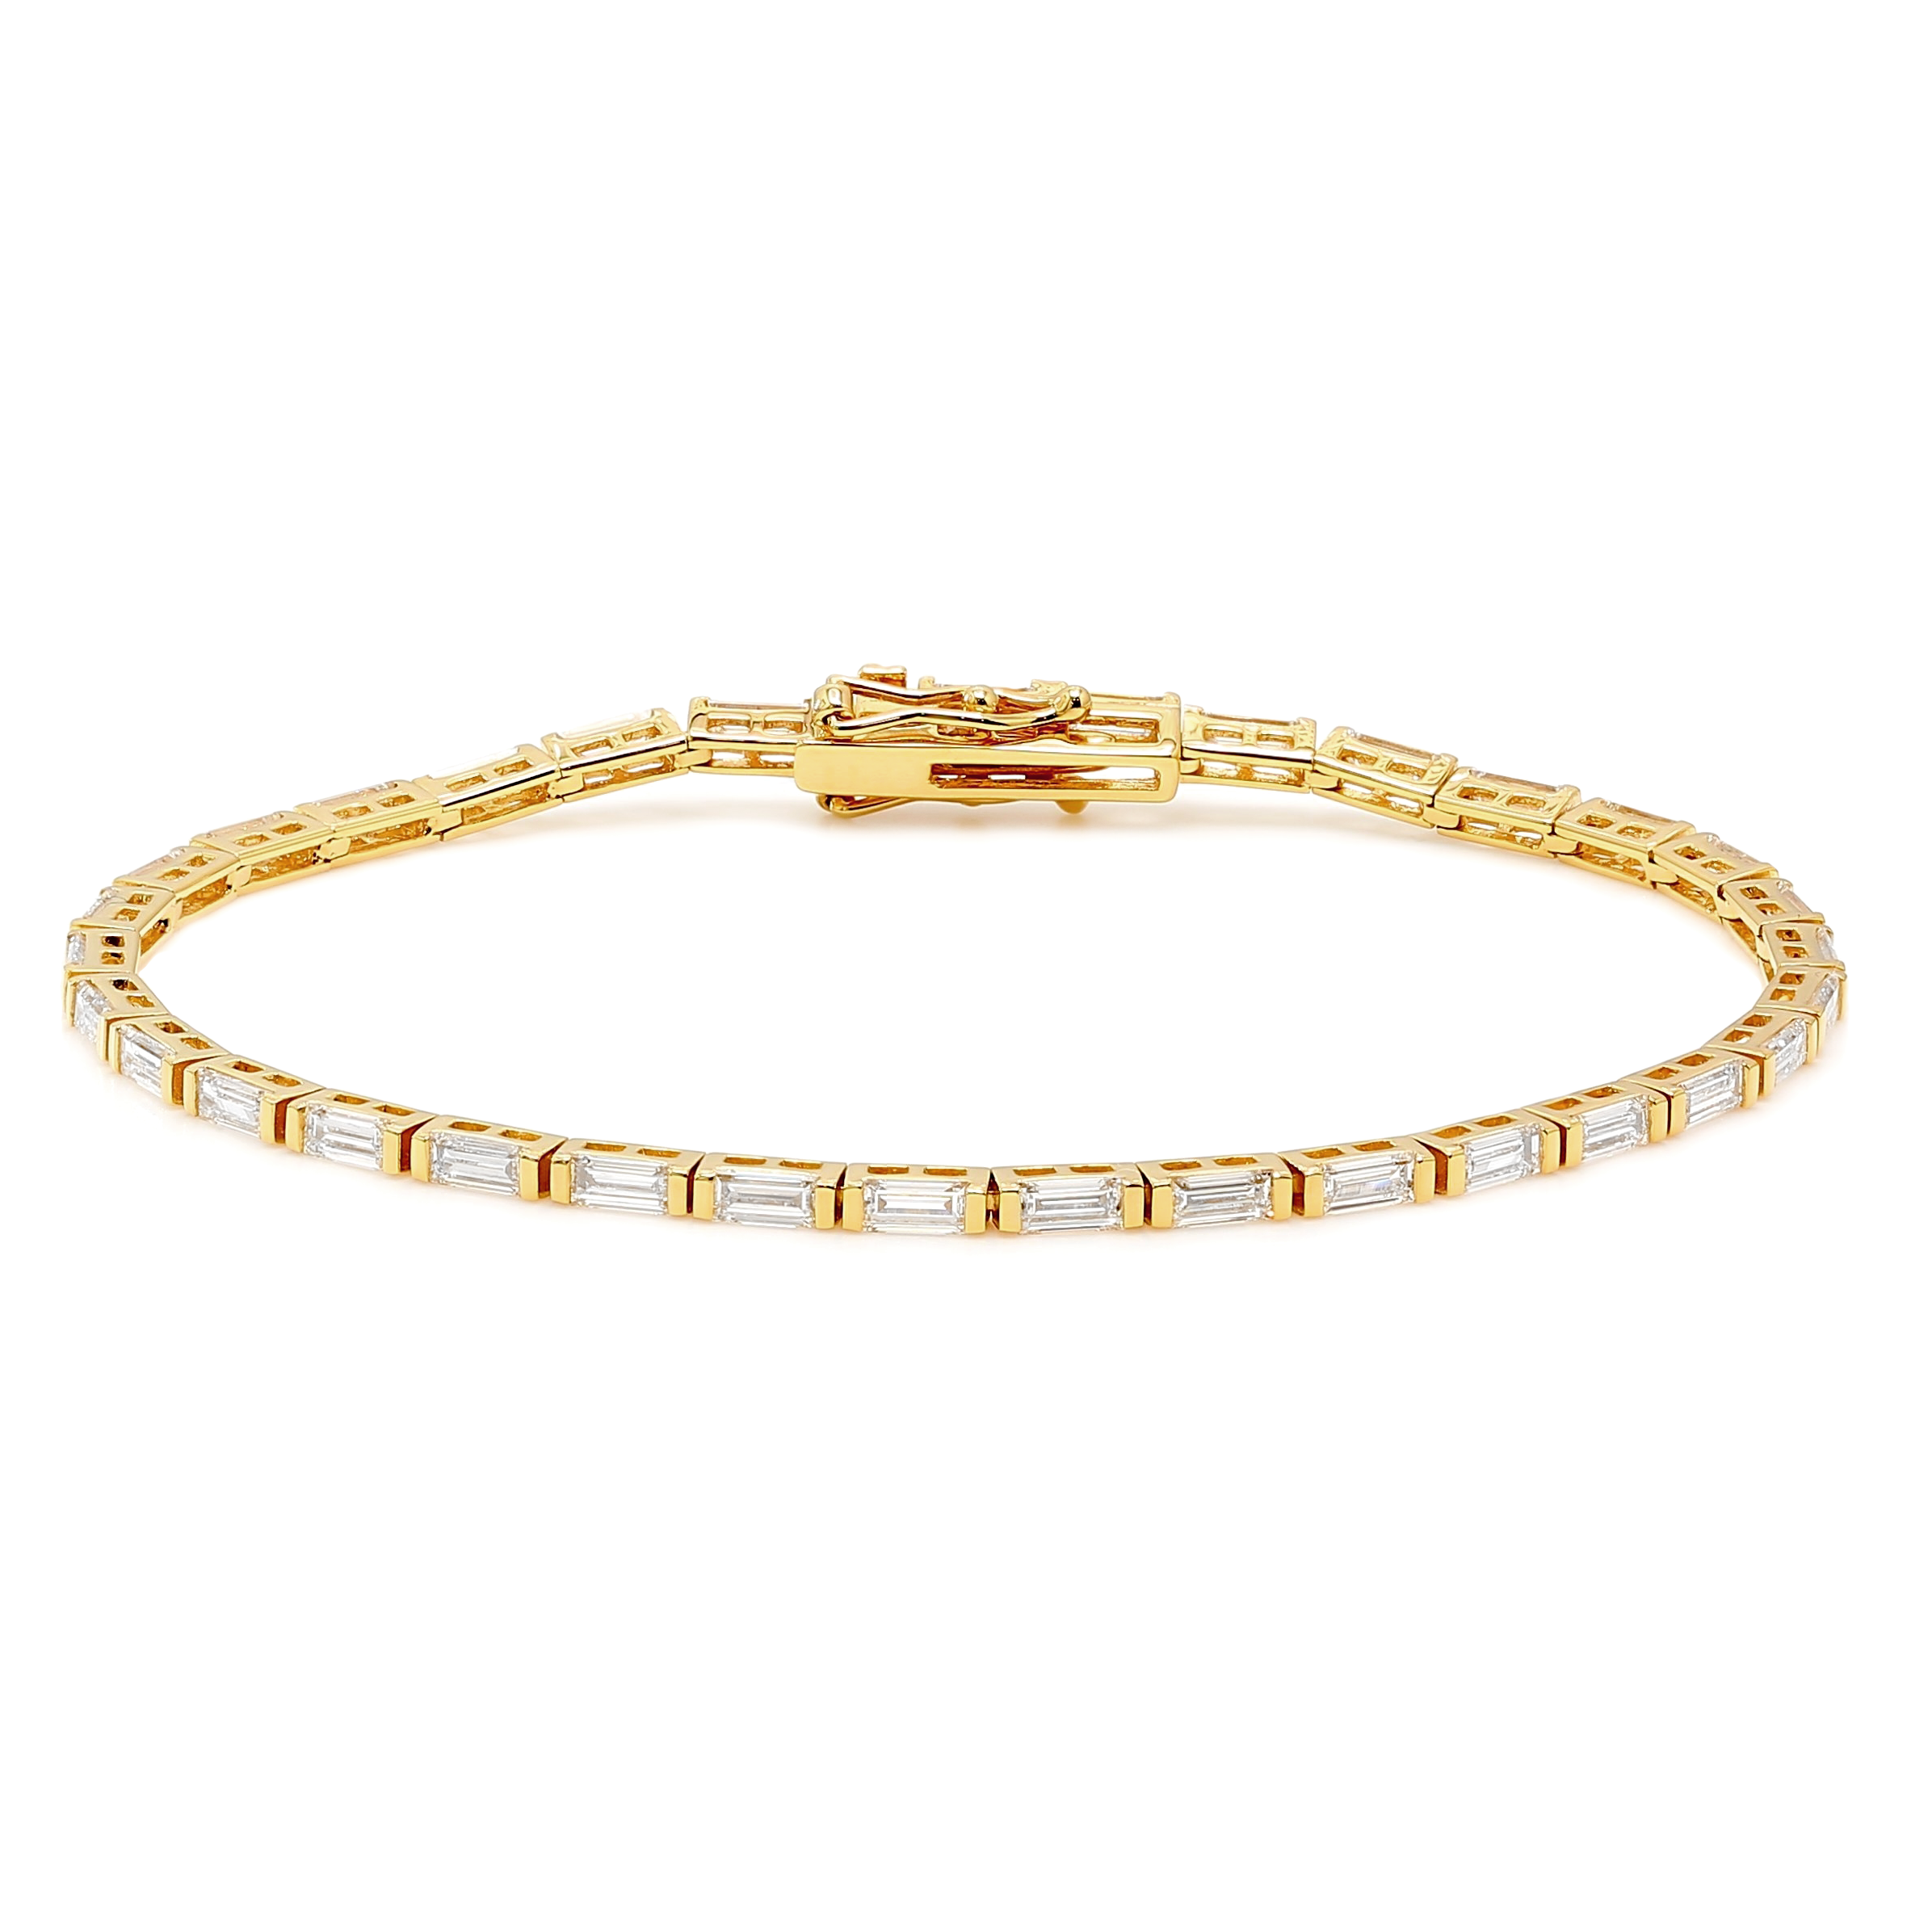 Baguette Diamond Tennis Bracelet 3.60ct crafted in 14K Yellow Gold - SHIMANSKY.CO.ZA